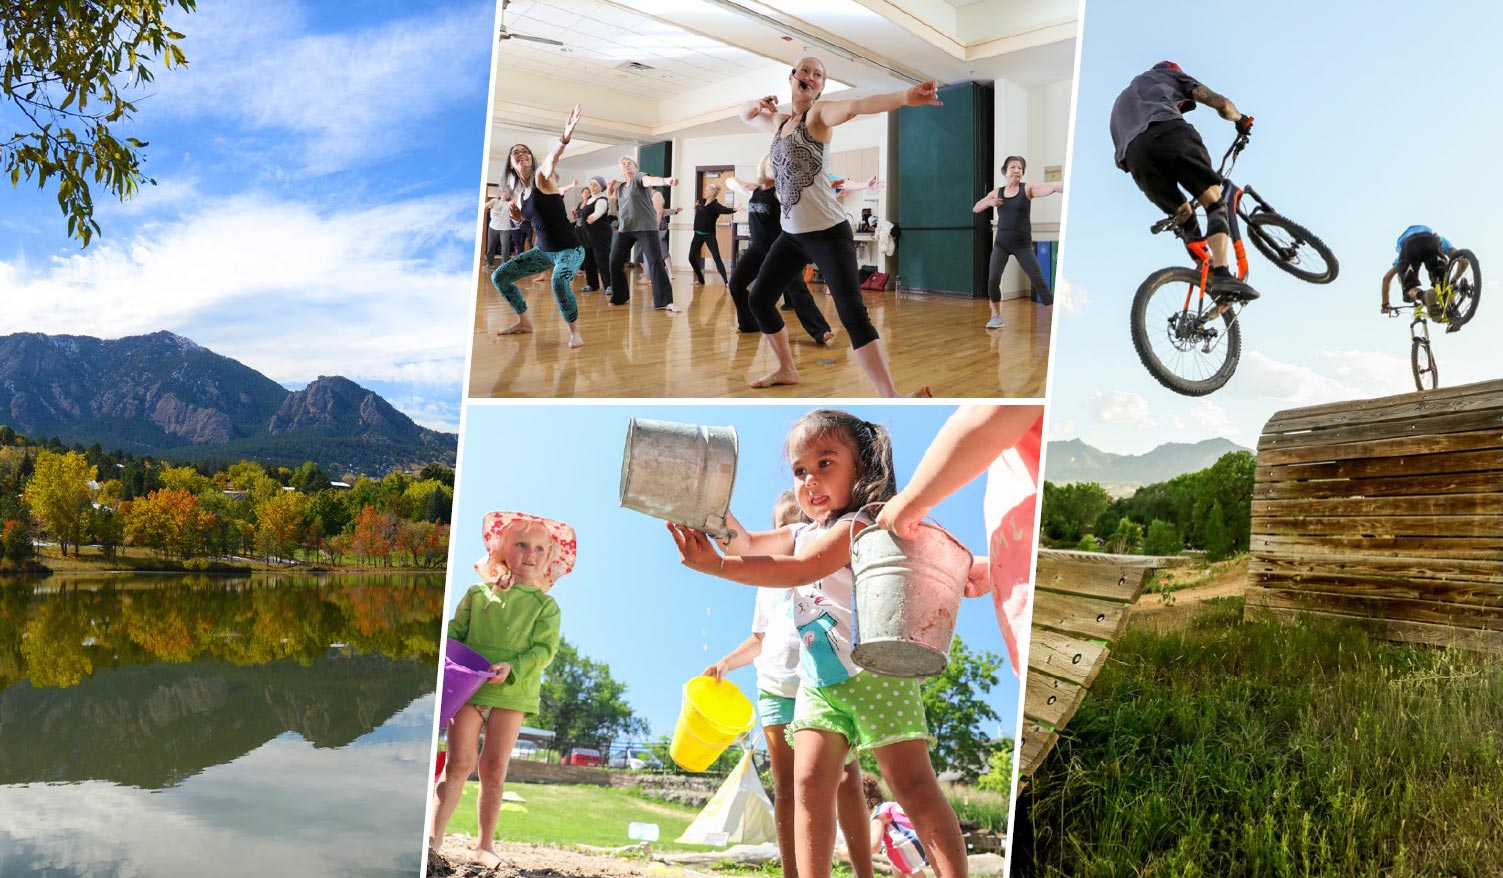 4 pictures showing the flatirons, children playing with buckets, a dance class, and bikers on wooden jumps.